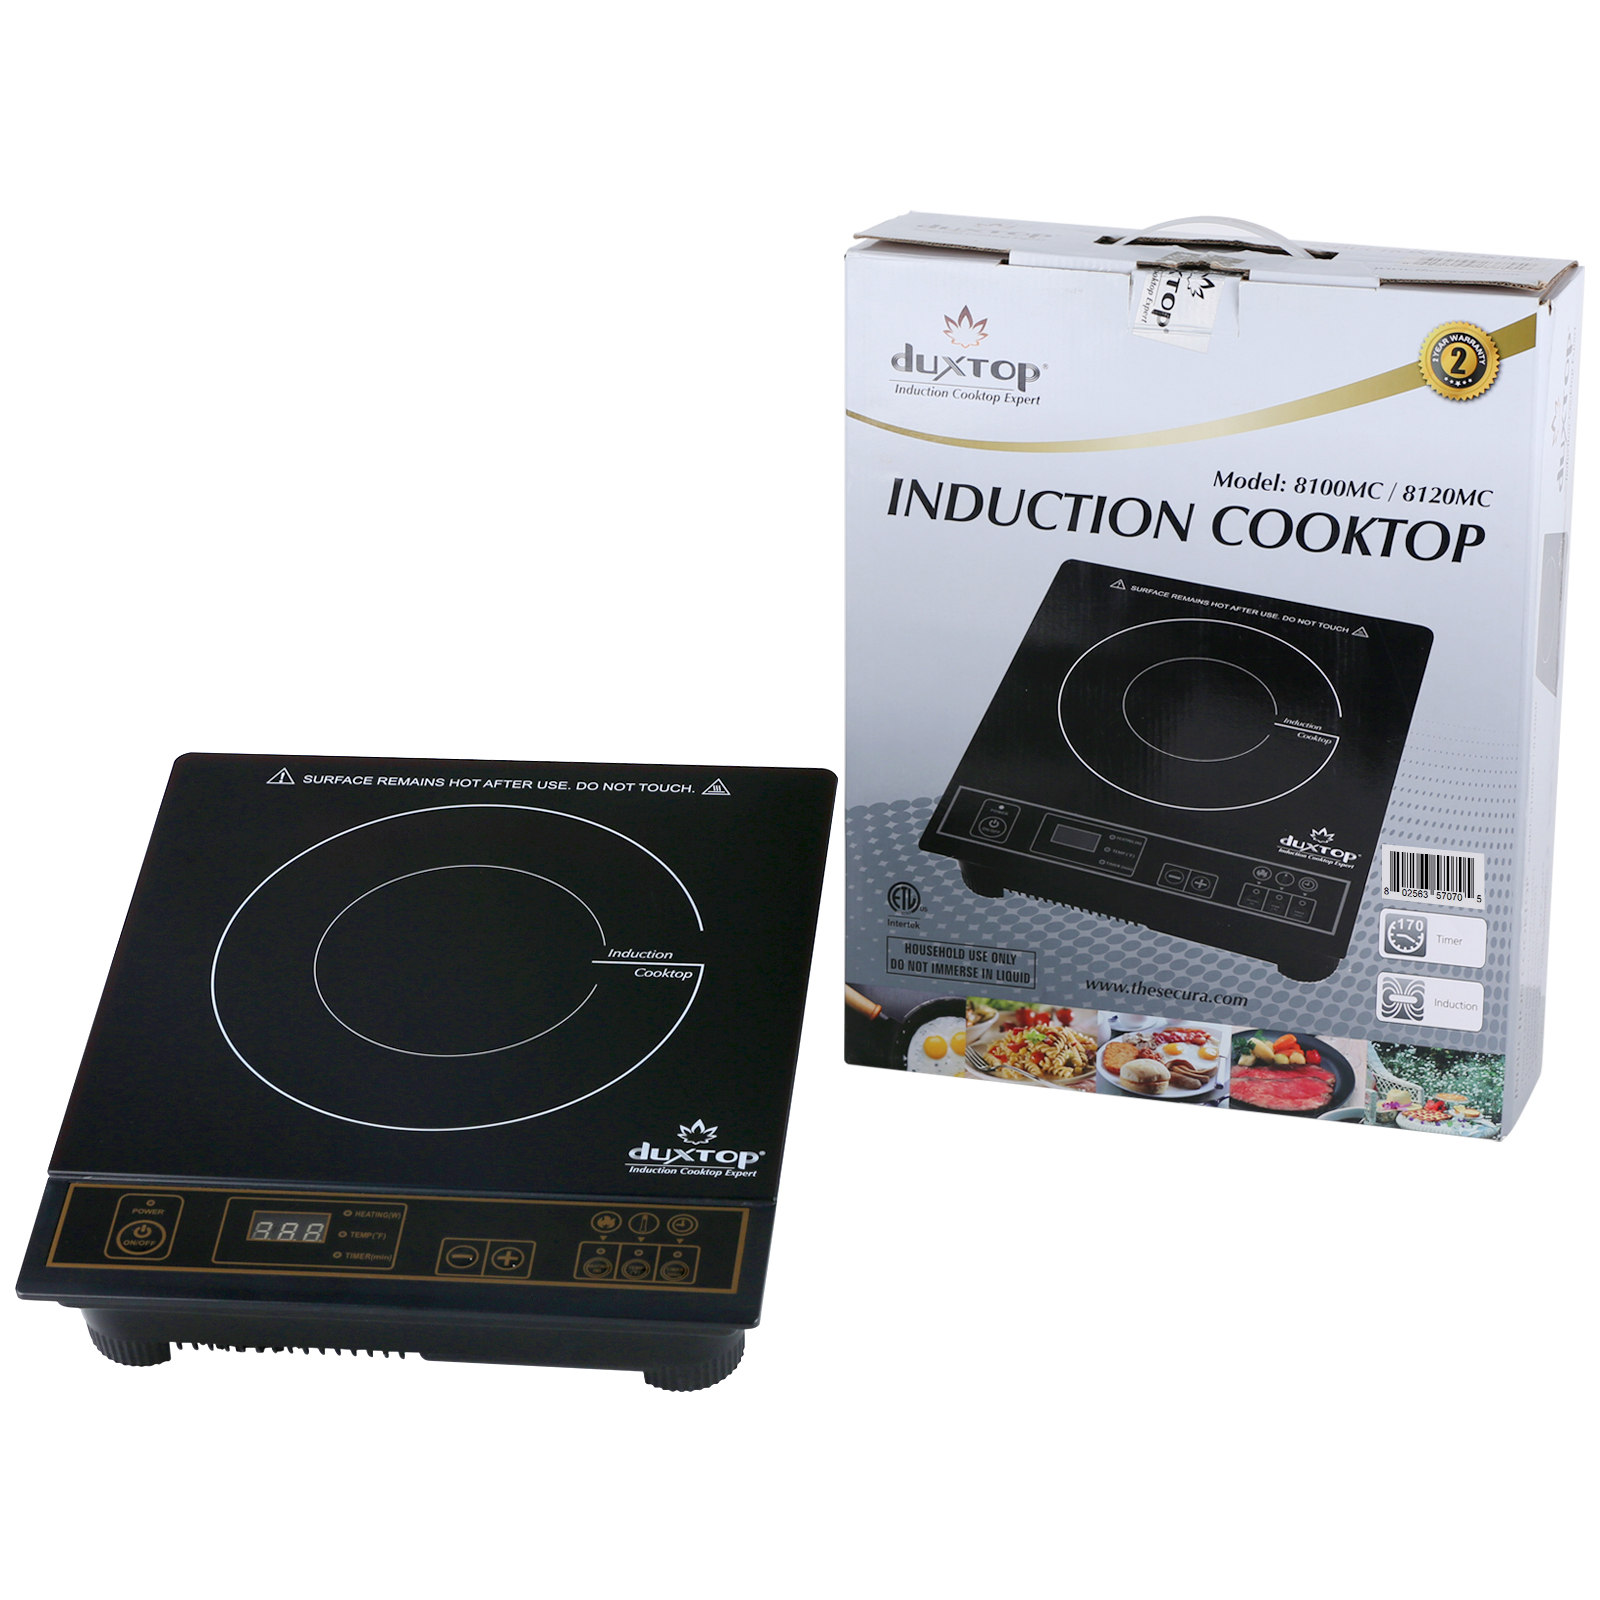 Duxtop 1800W Portable Induction Cooktop Countertop Burner, Gold 8100MC -  household items - by owner - housewares sale